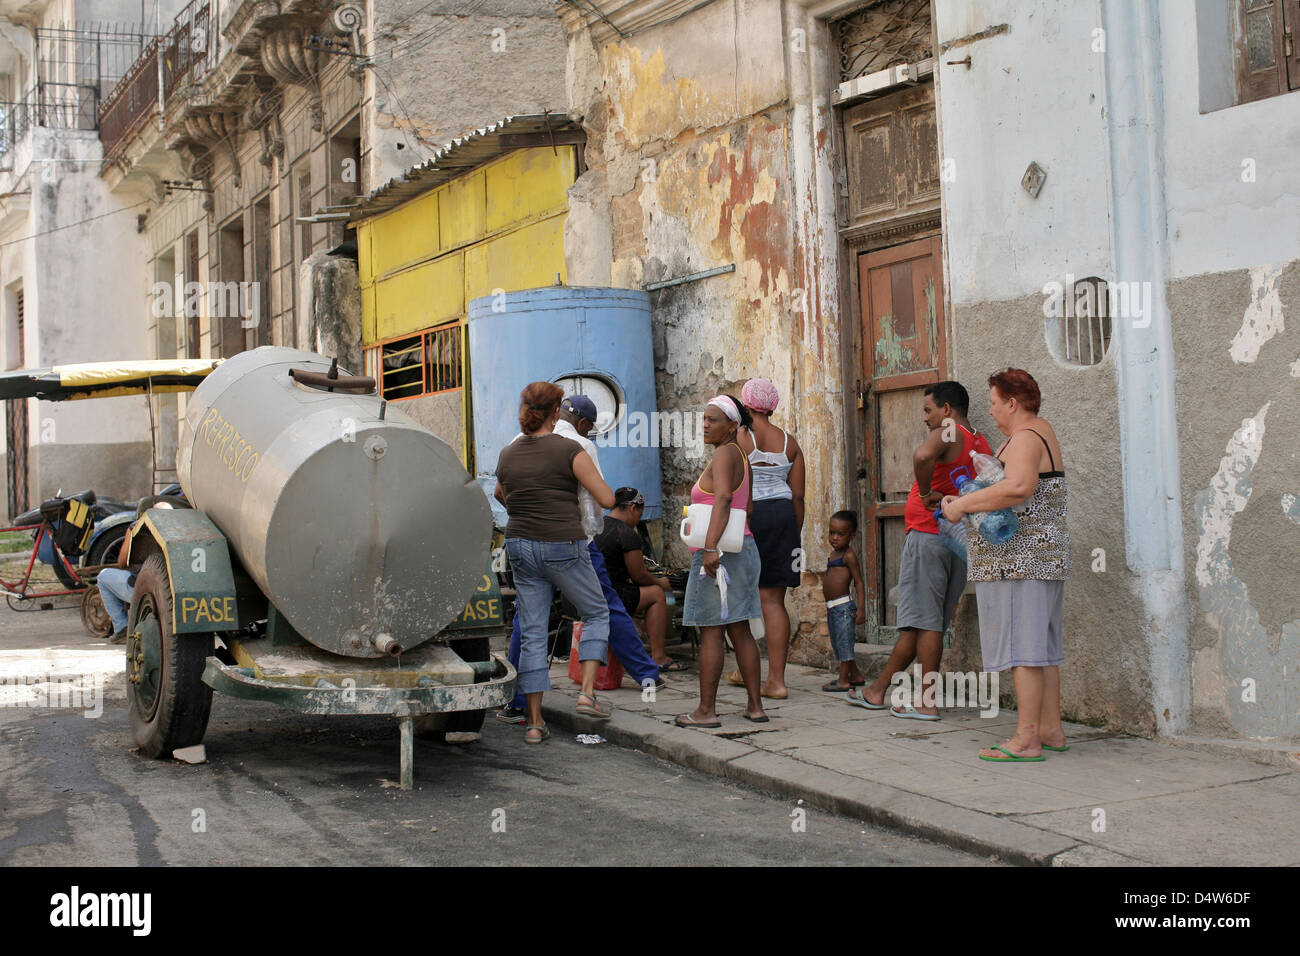 A group of people stands around a water tank for drinking water in Havanna, Cuba, 21 September 2009. Photo: Fredrik von Erichsen Stock Photo